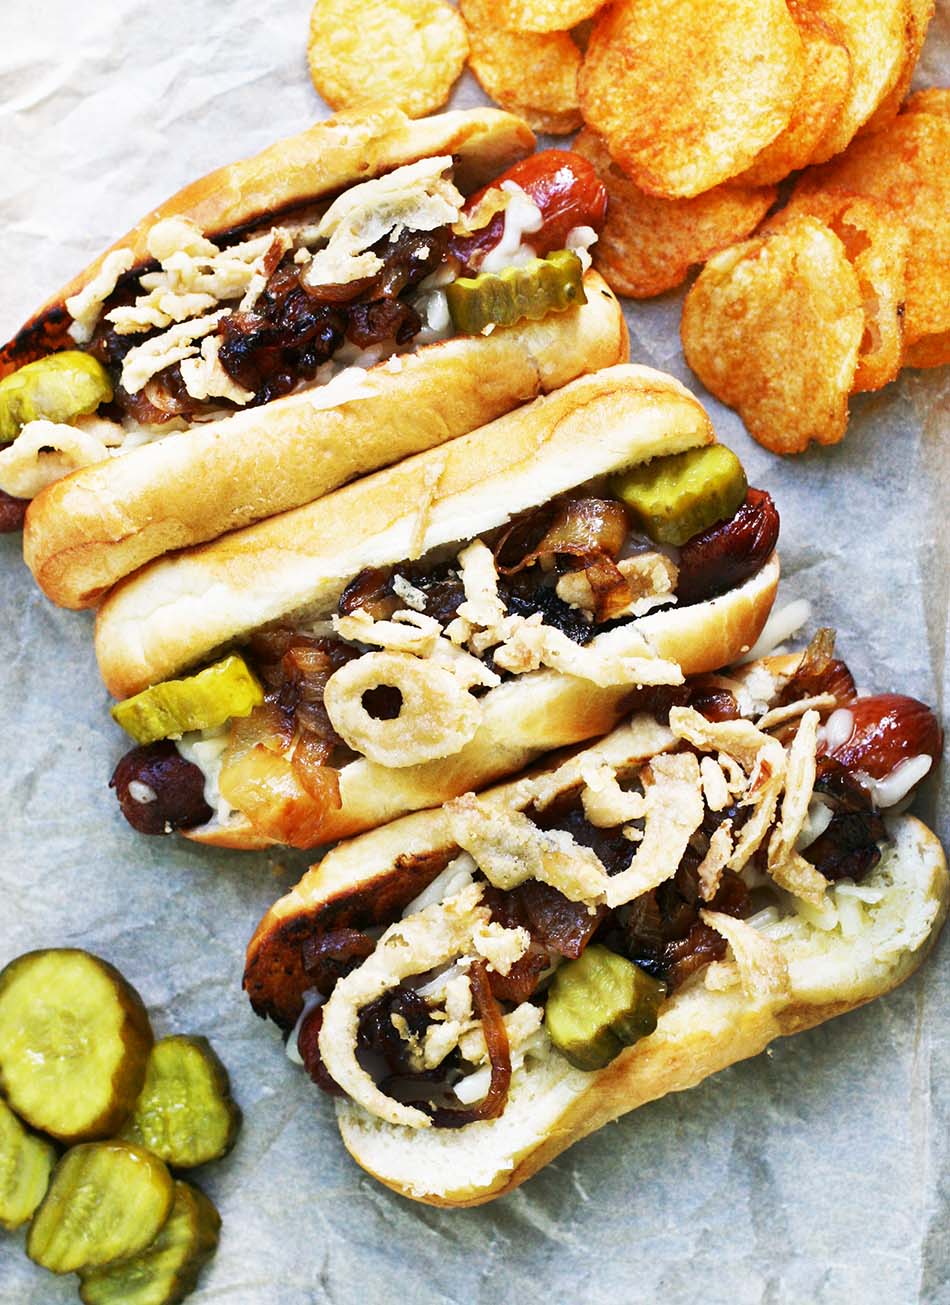 French onion hot dogs: A delicious spin on hot dogs. Click through for recipe!